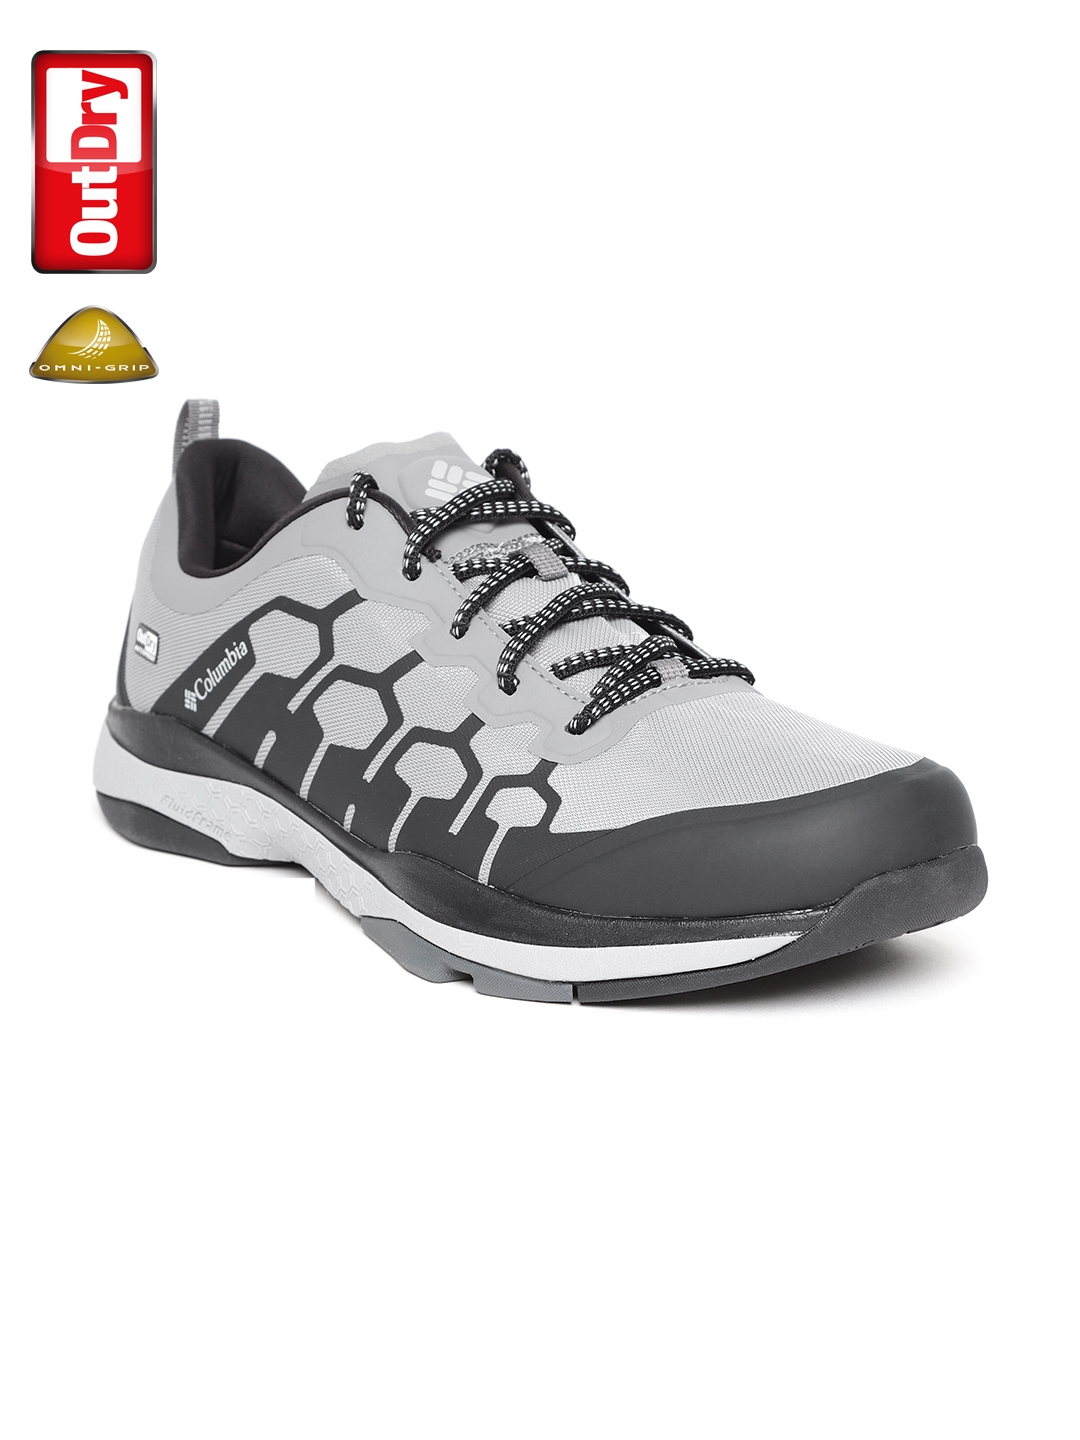 columbia outdry shoes techlite